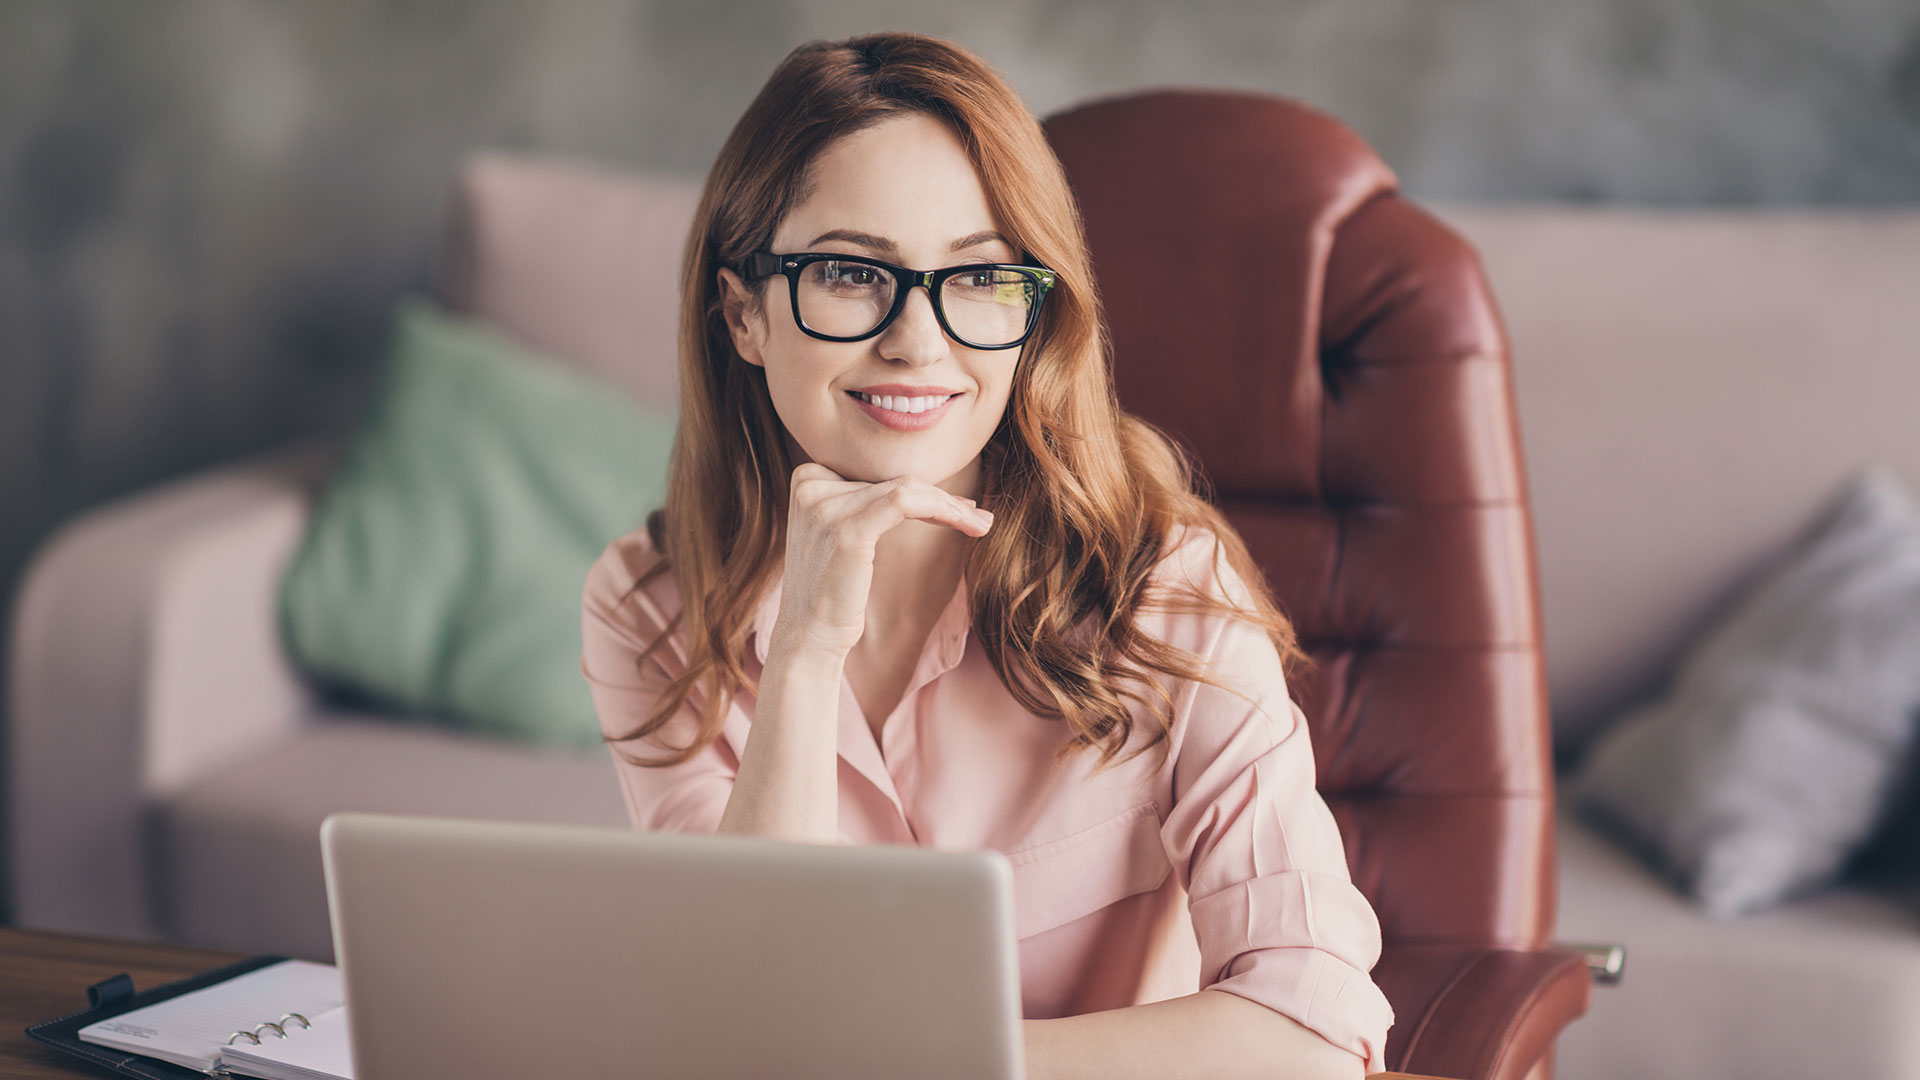 A young business woman sits smiling at her computer. Team building activities are an important part of building an inclusive and productive team culture